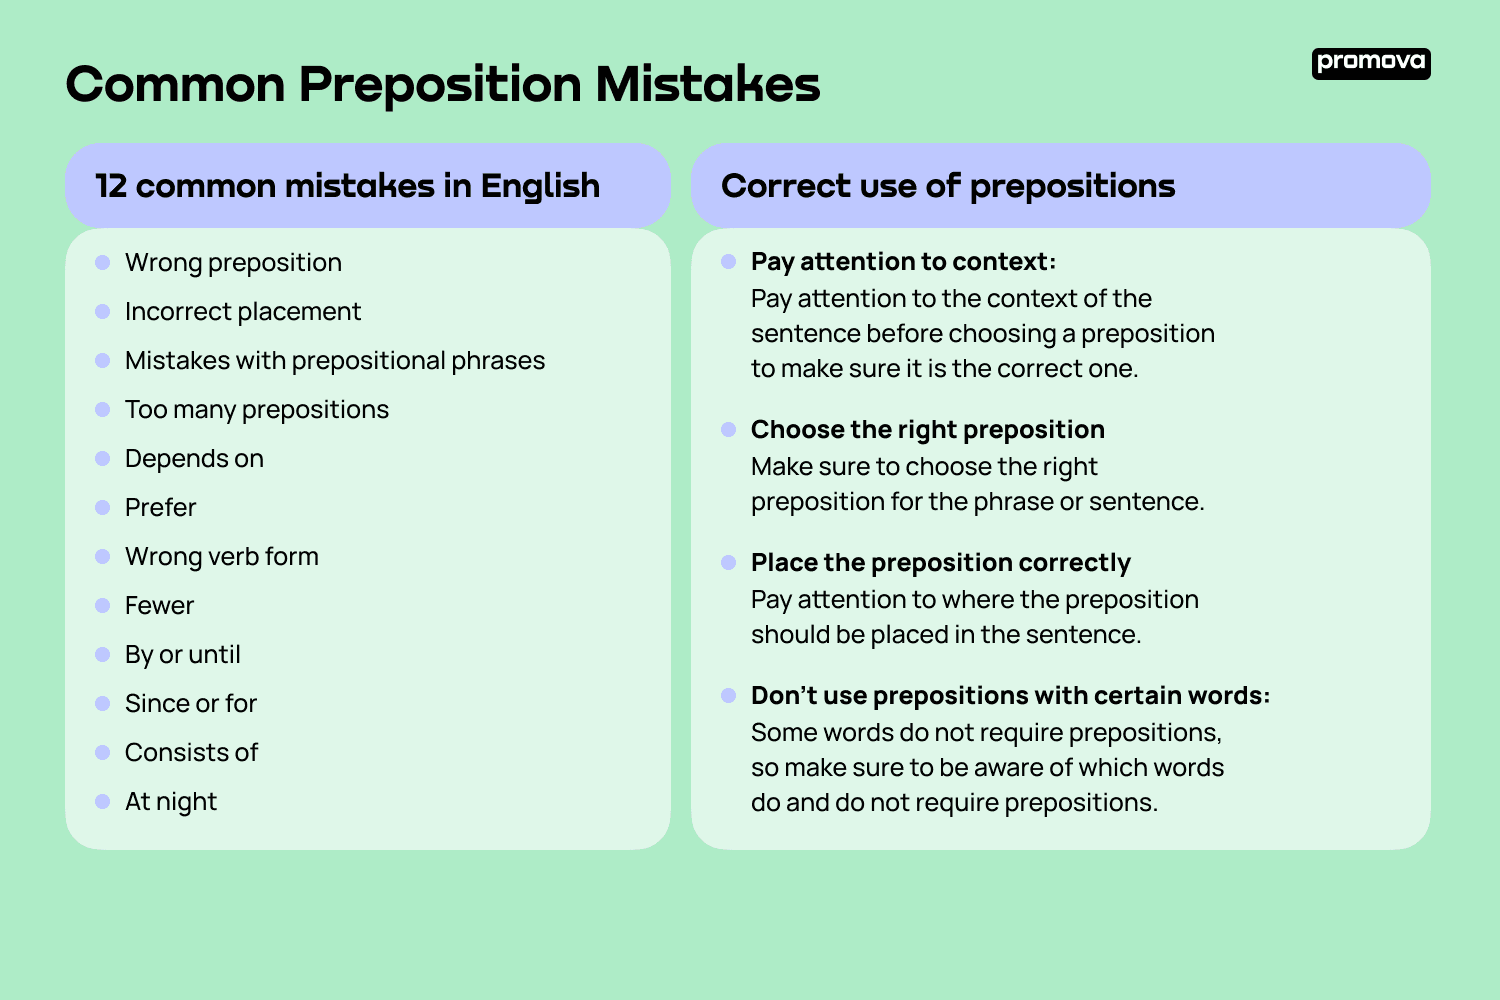 12 common mistakes in English